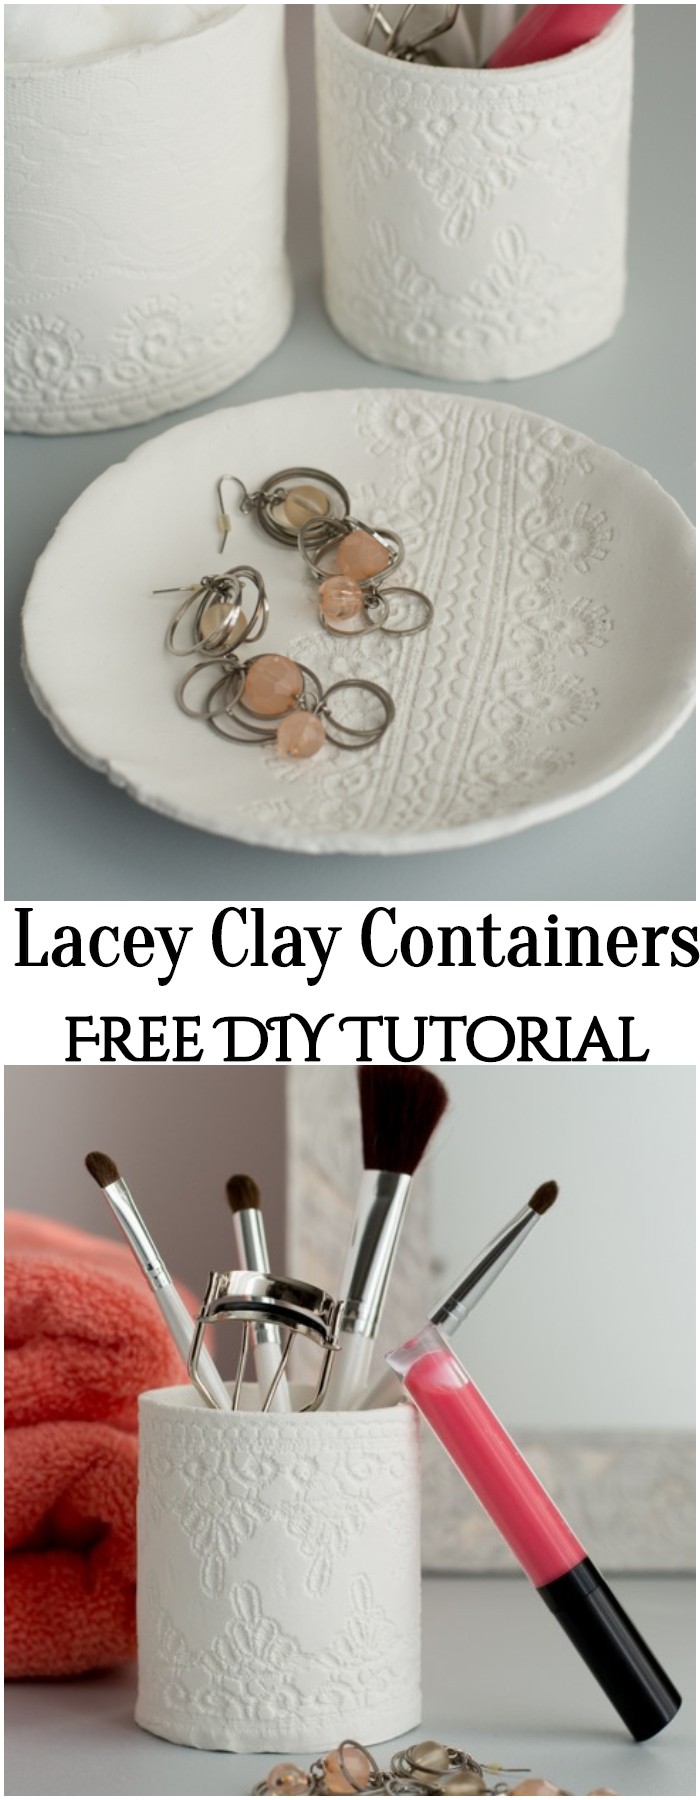 DIY Lacey Clay Containers